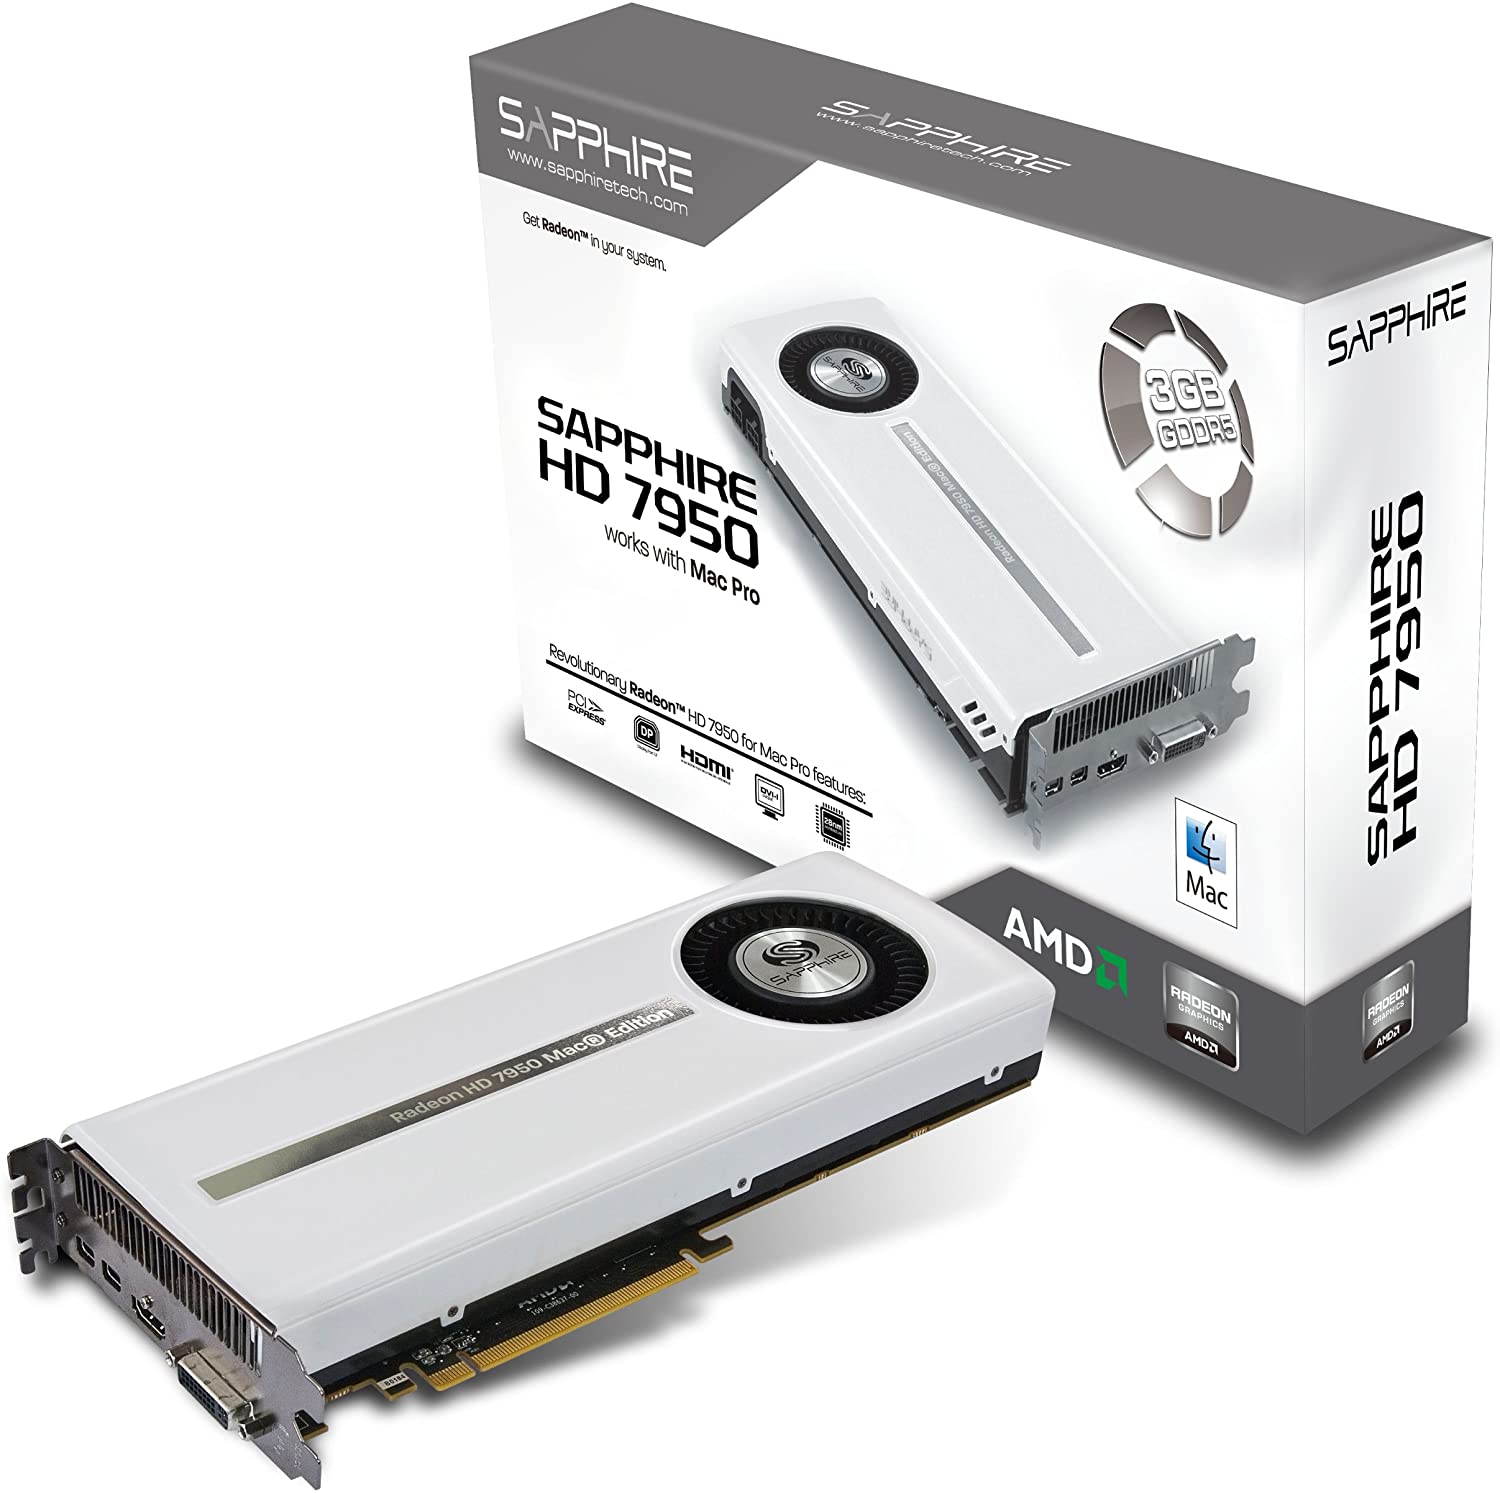 video cards for mac 10.7.5